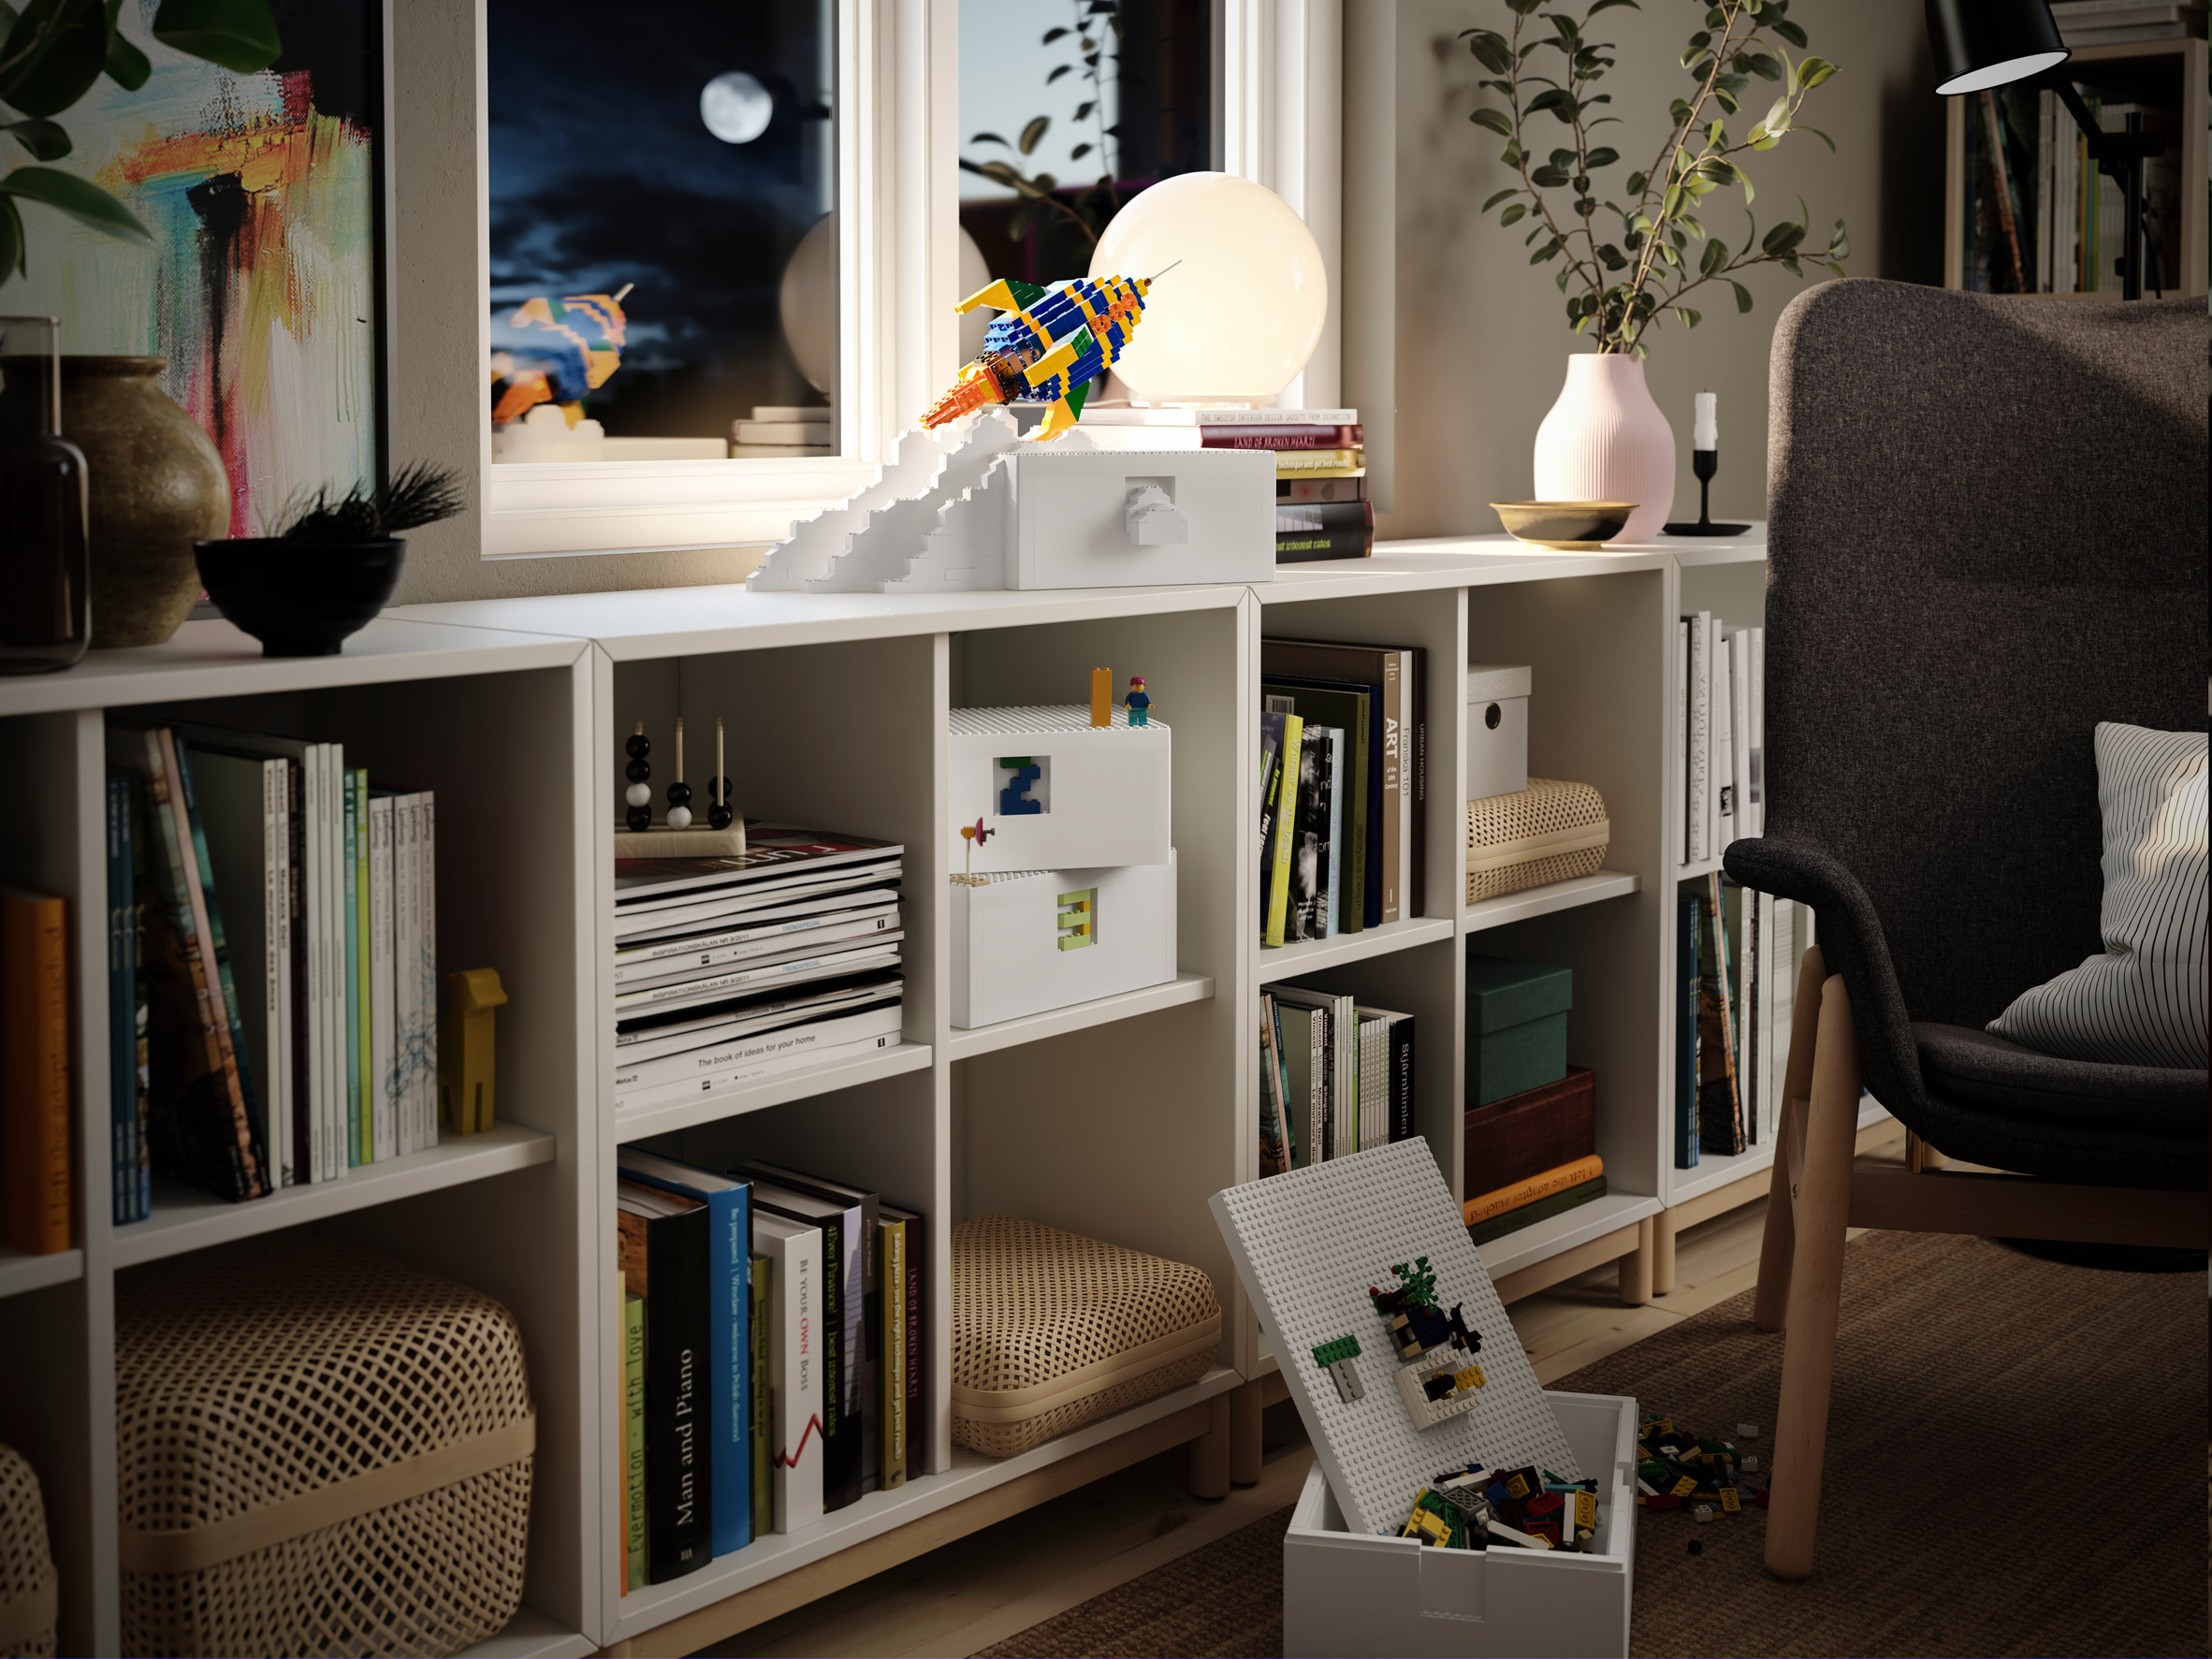 IKEA and Lego release Bygglek storage boxes that double up as building bases